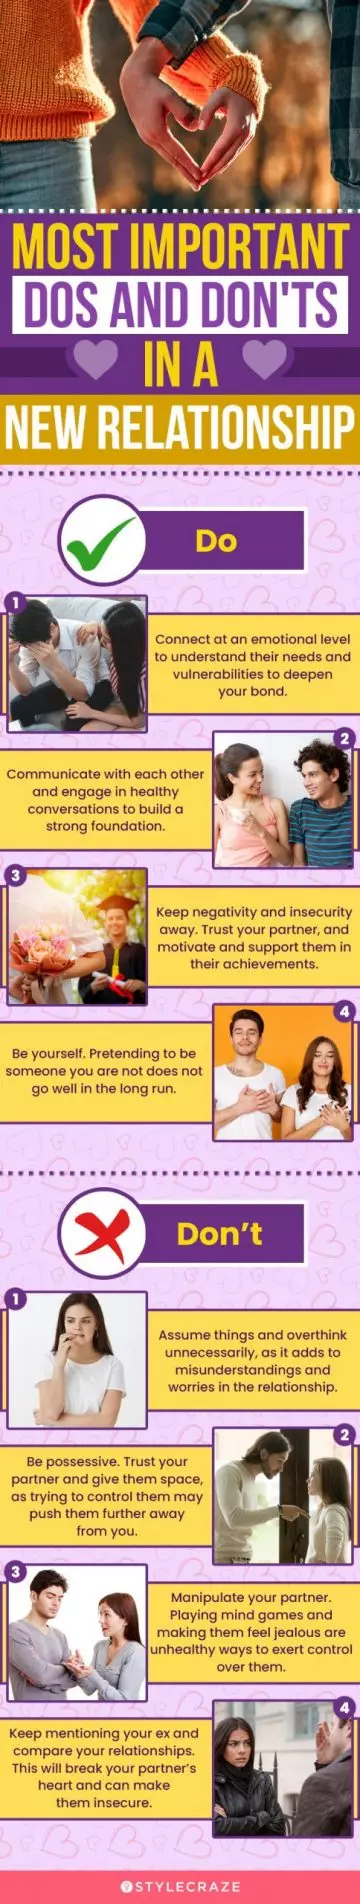 most important dos and don'ts in a new relationship (infographic)